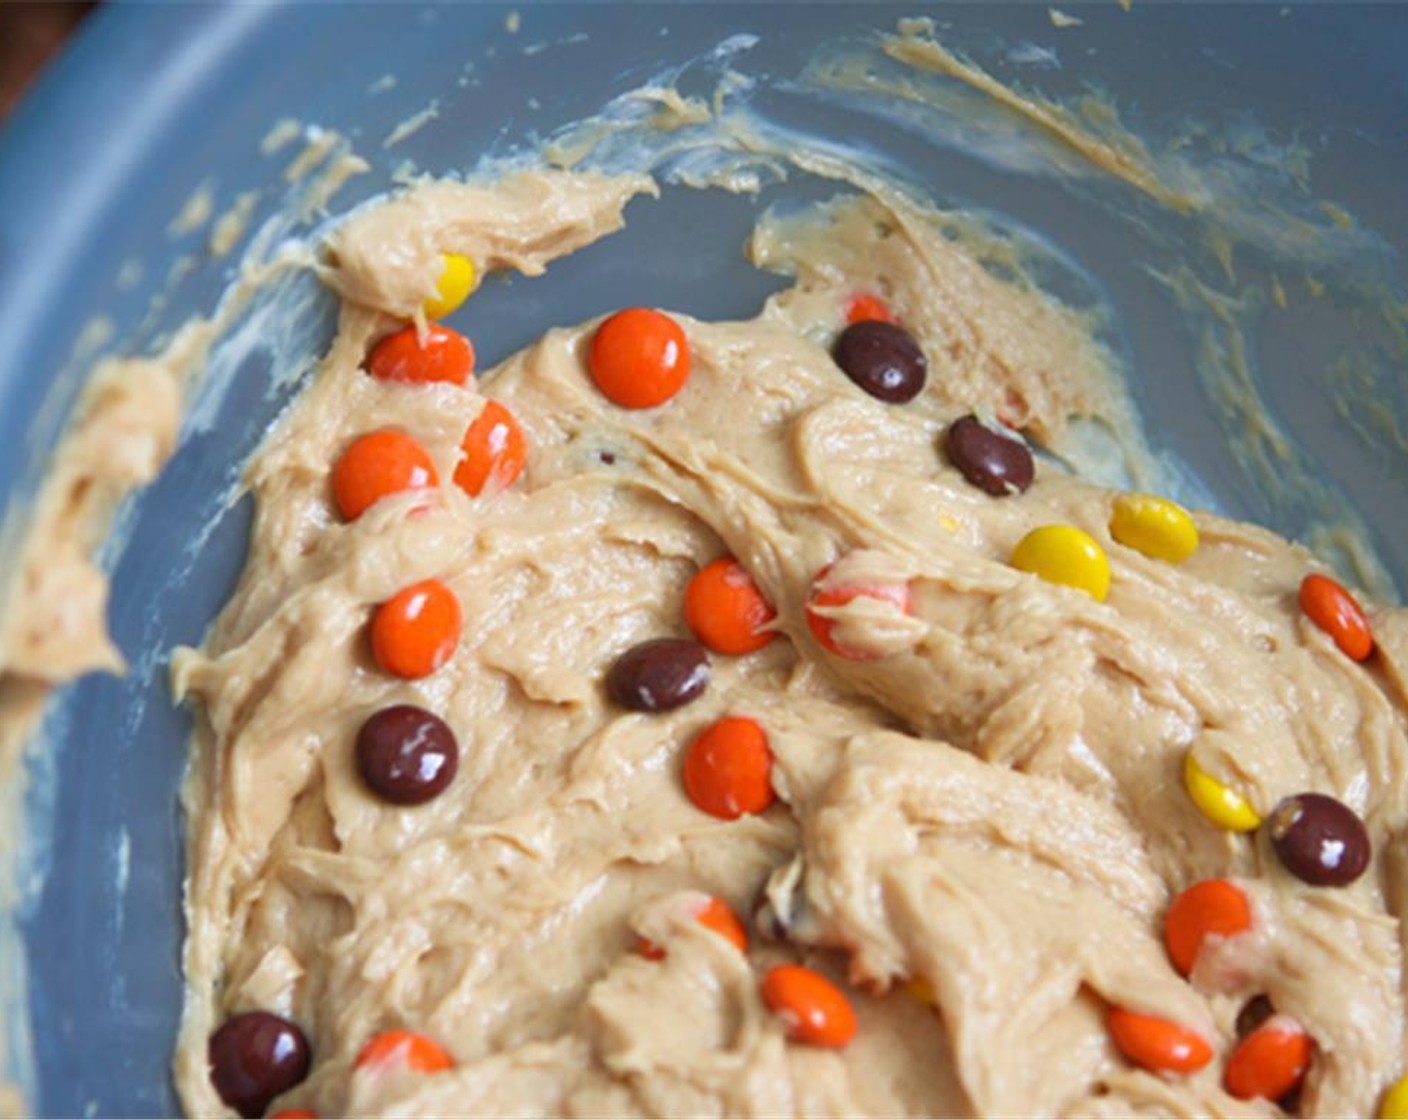 step 3 In a large bowl, beat Cream Cheese (1 cup) with hand-held mixer until fluffy. Add Sweetened Condensed Milk (1 can) and Creamy Peanut Butter (1/2 cup) and beat until smooth. Stir in the Reese's Pieces Candies (2 1/3 cups).